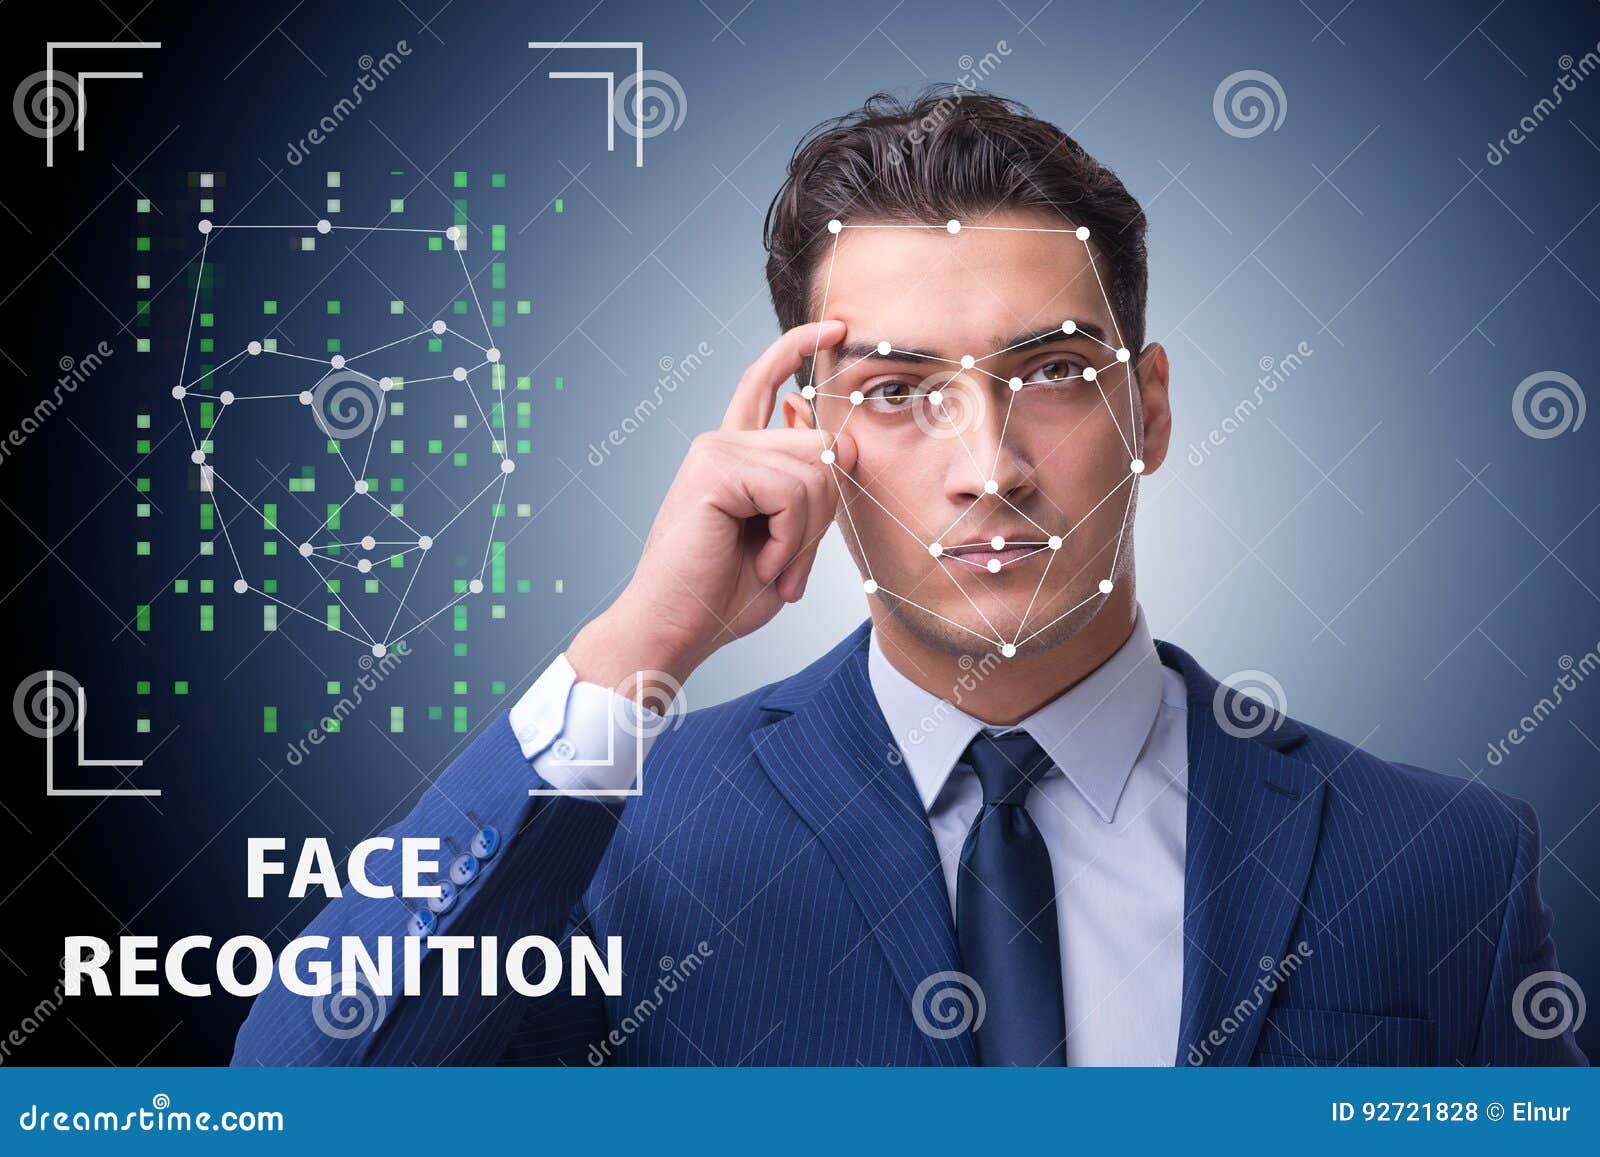 the man in face recognition concept